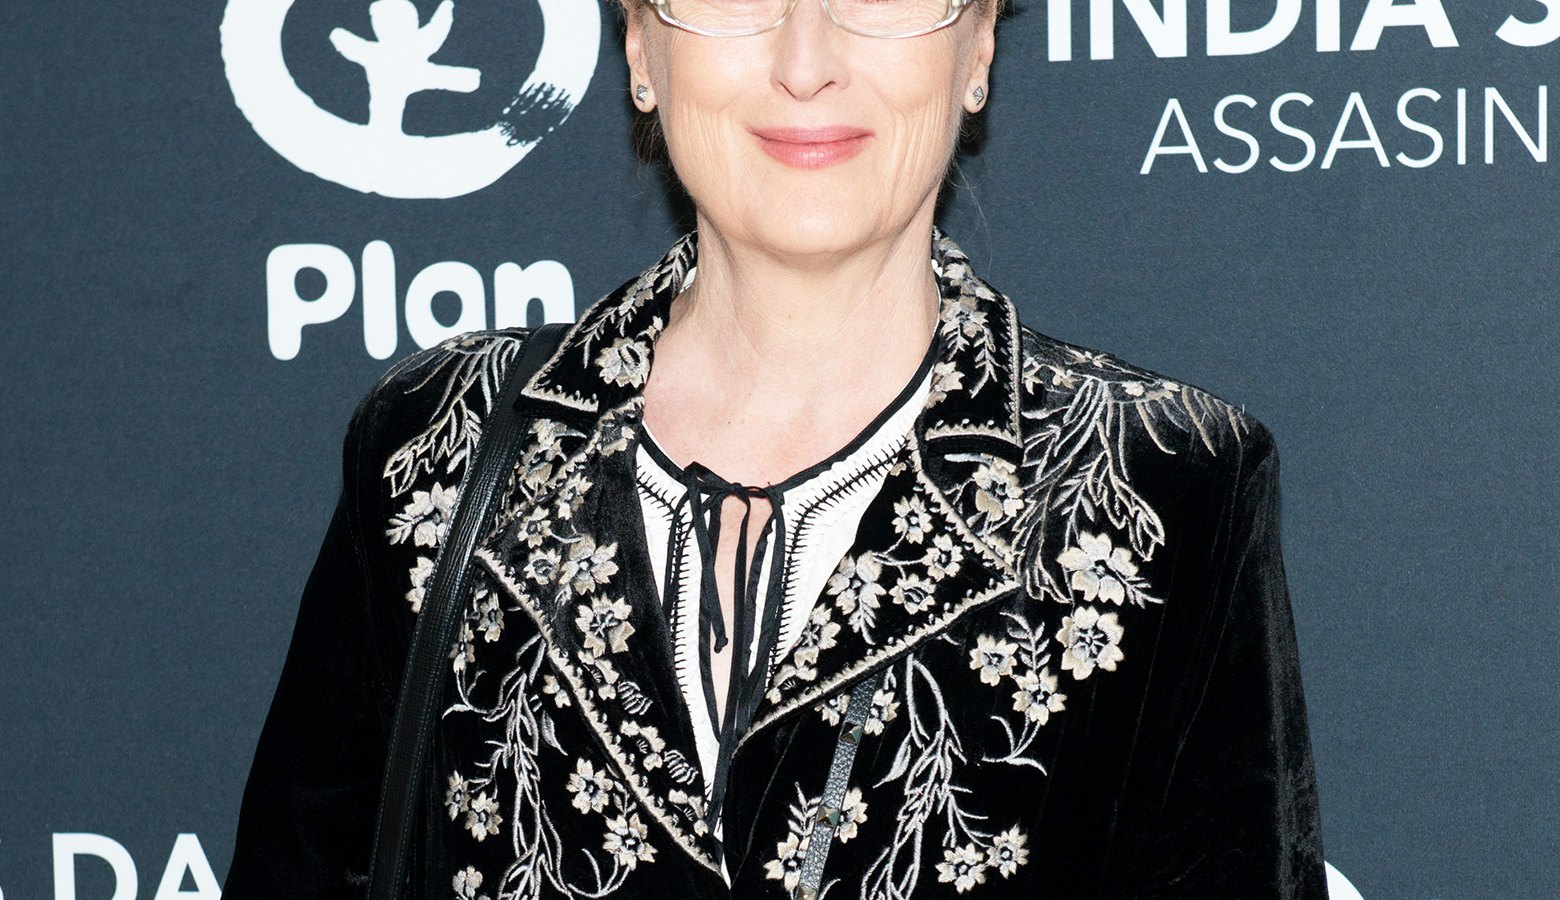 Meryl Streep is lobbying Congress over equal rights for women